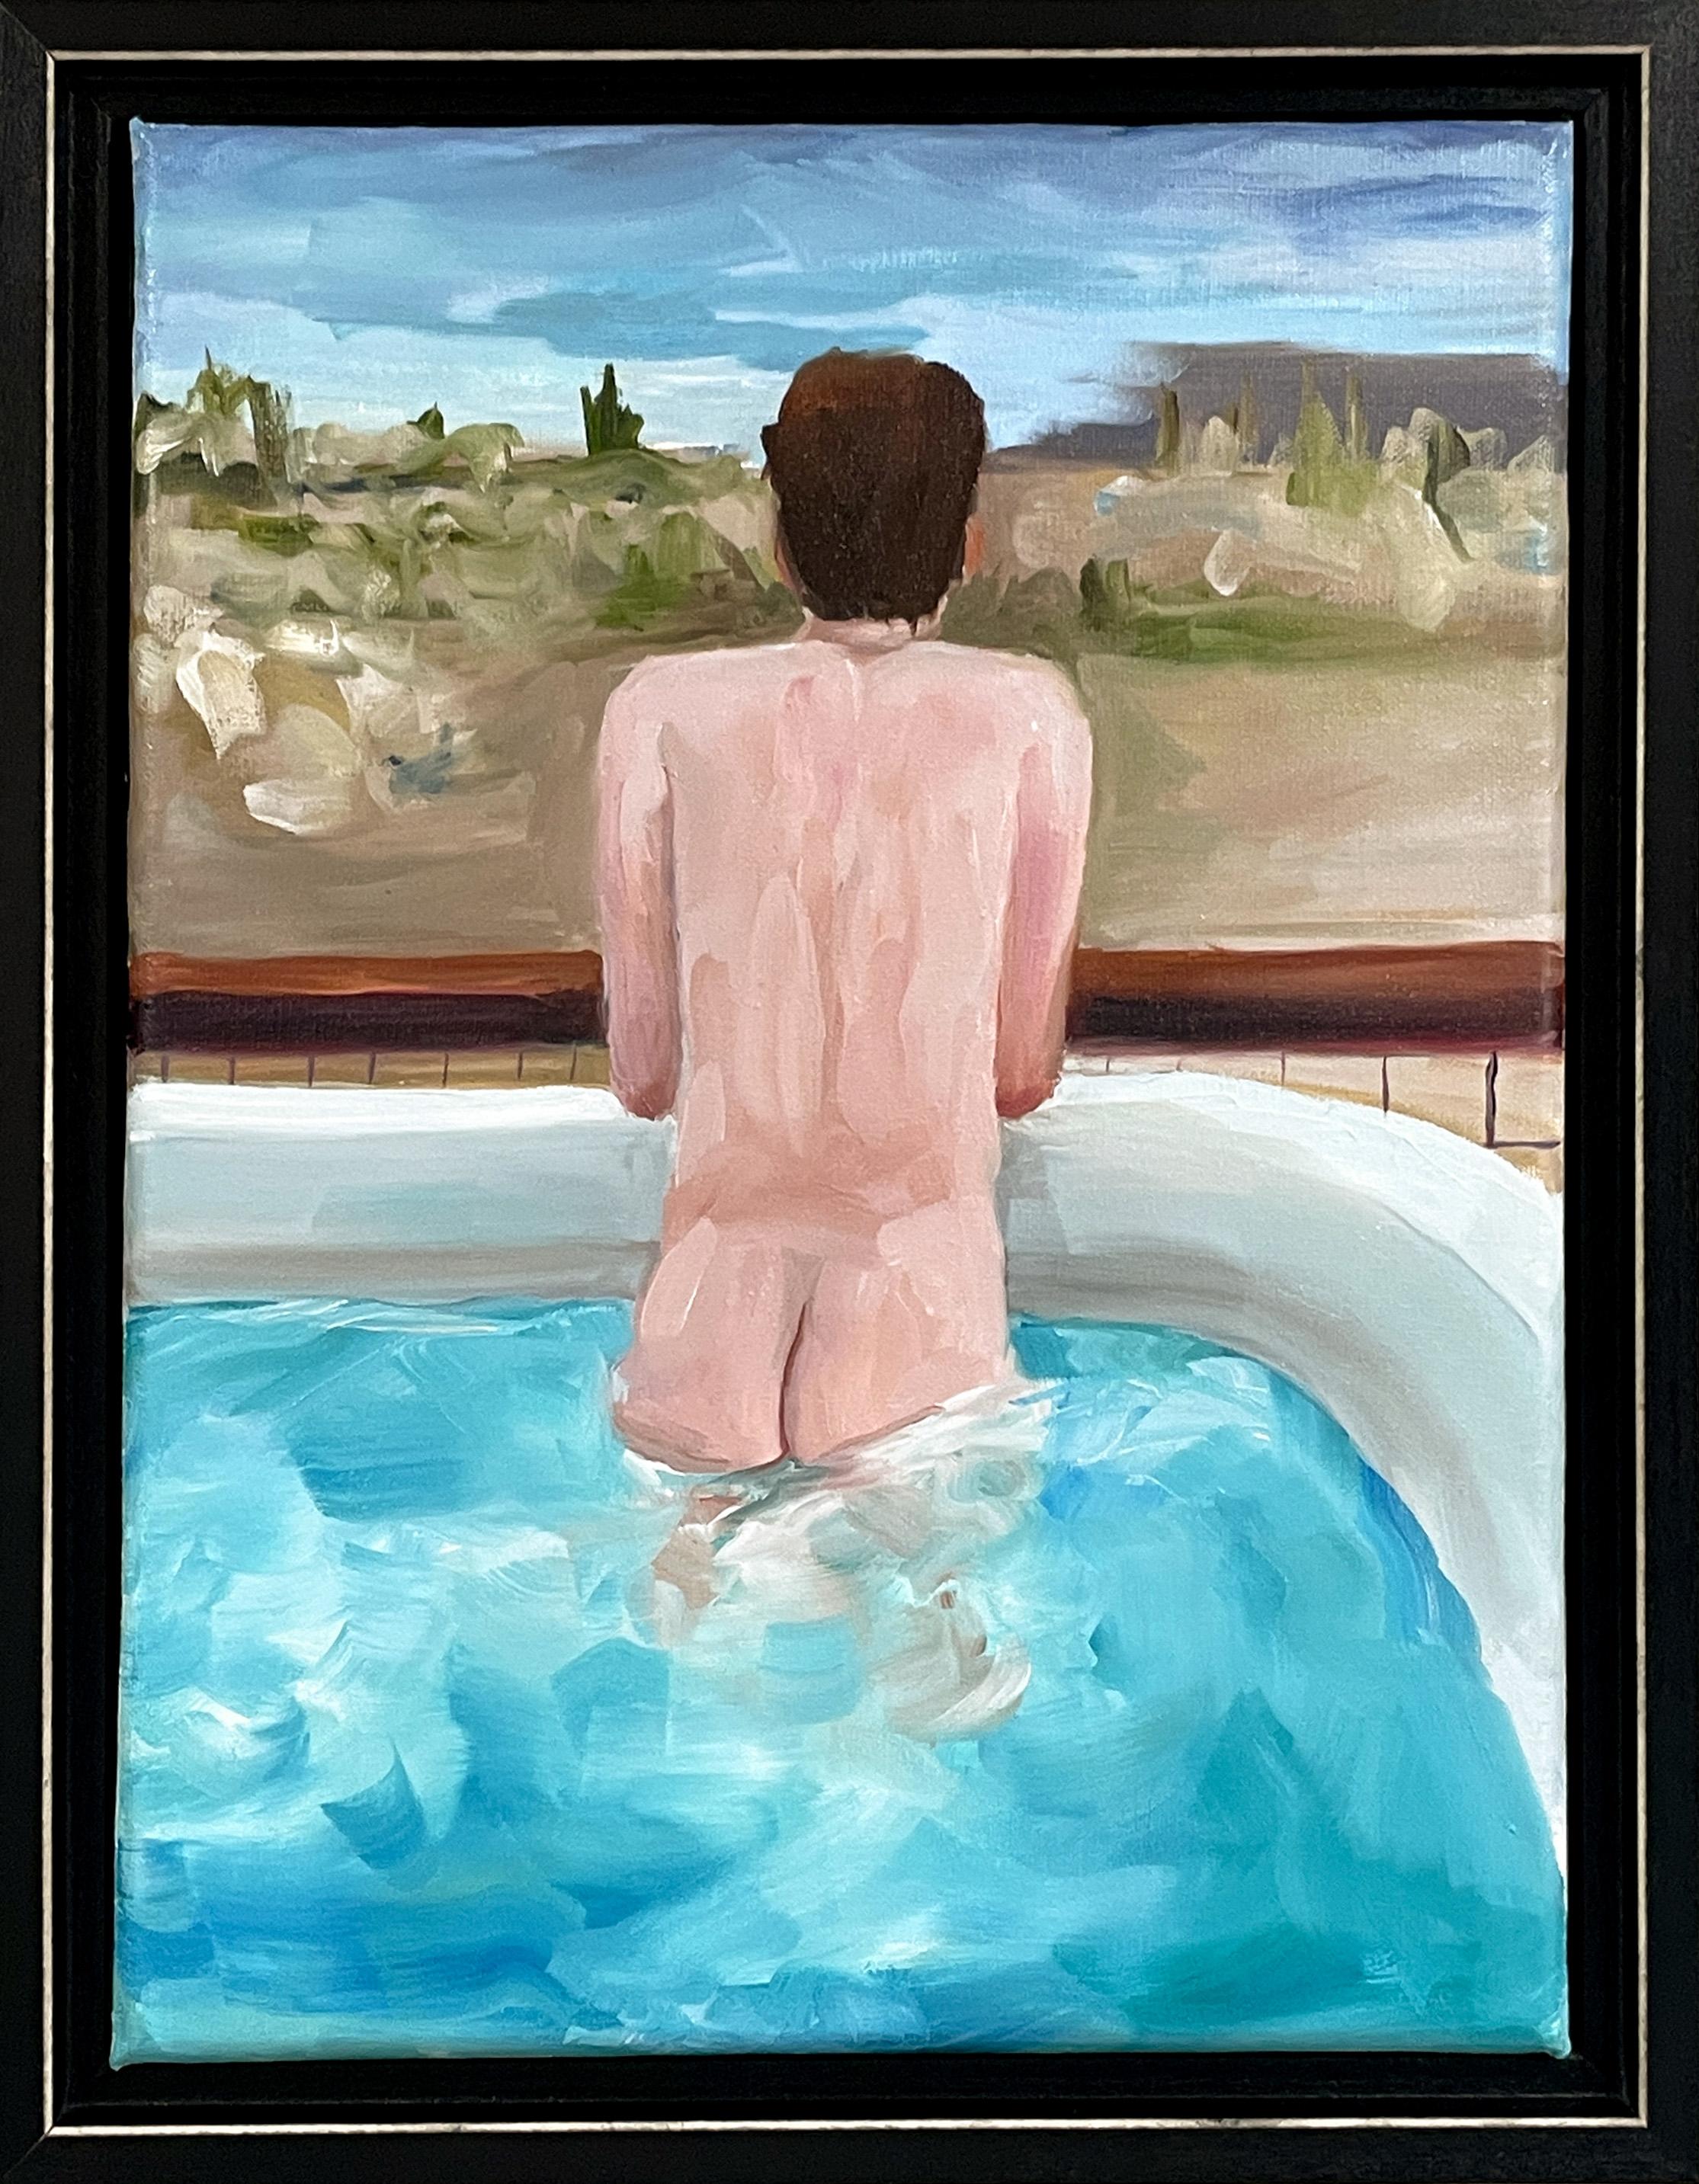 “Hot Tub During a Cold Dawn”- oil on linen, framed - Painting by Kory Alexander